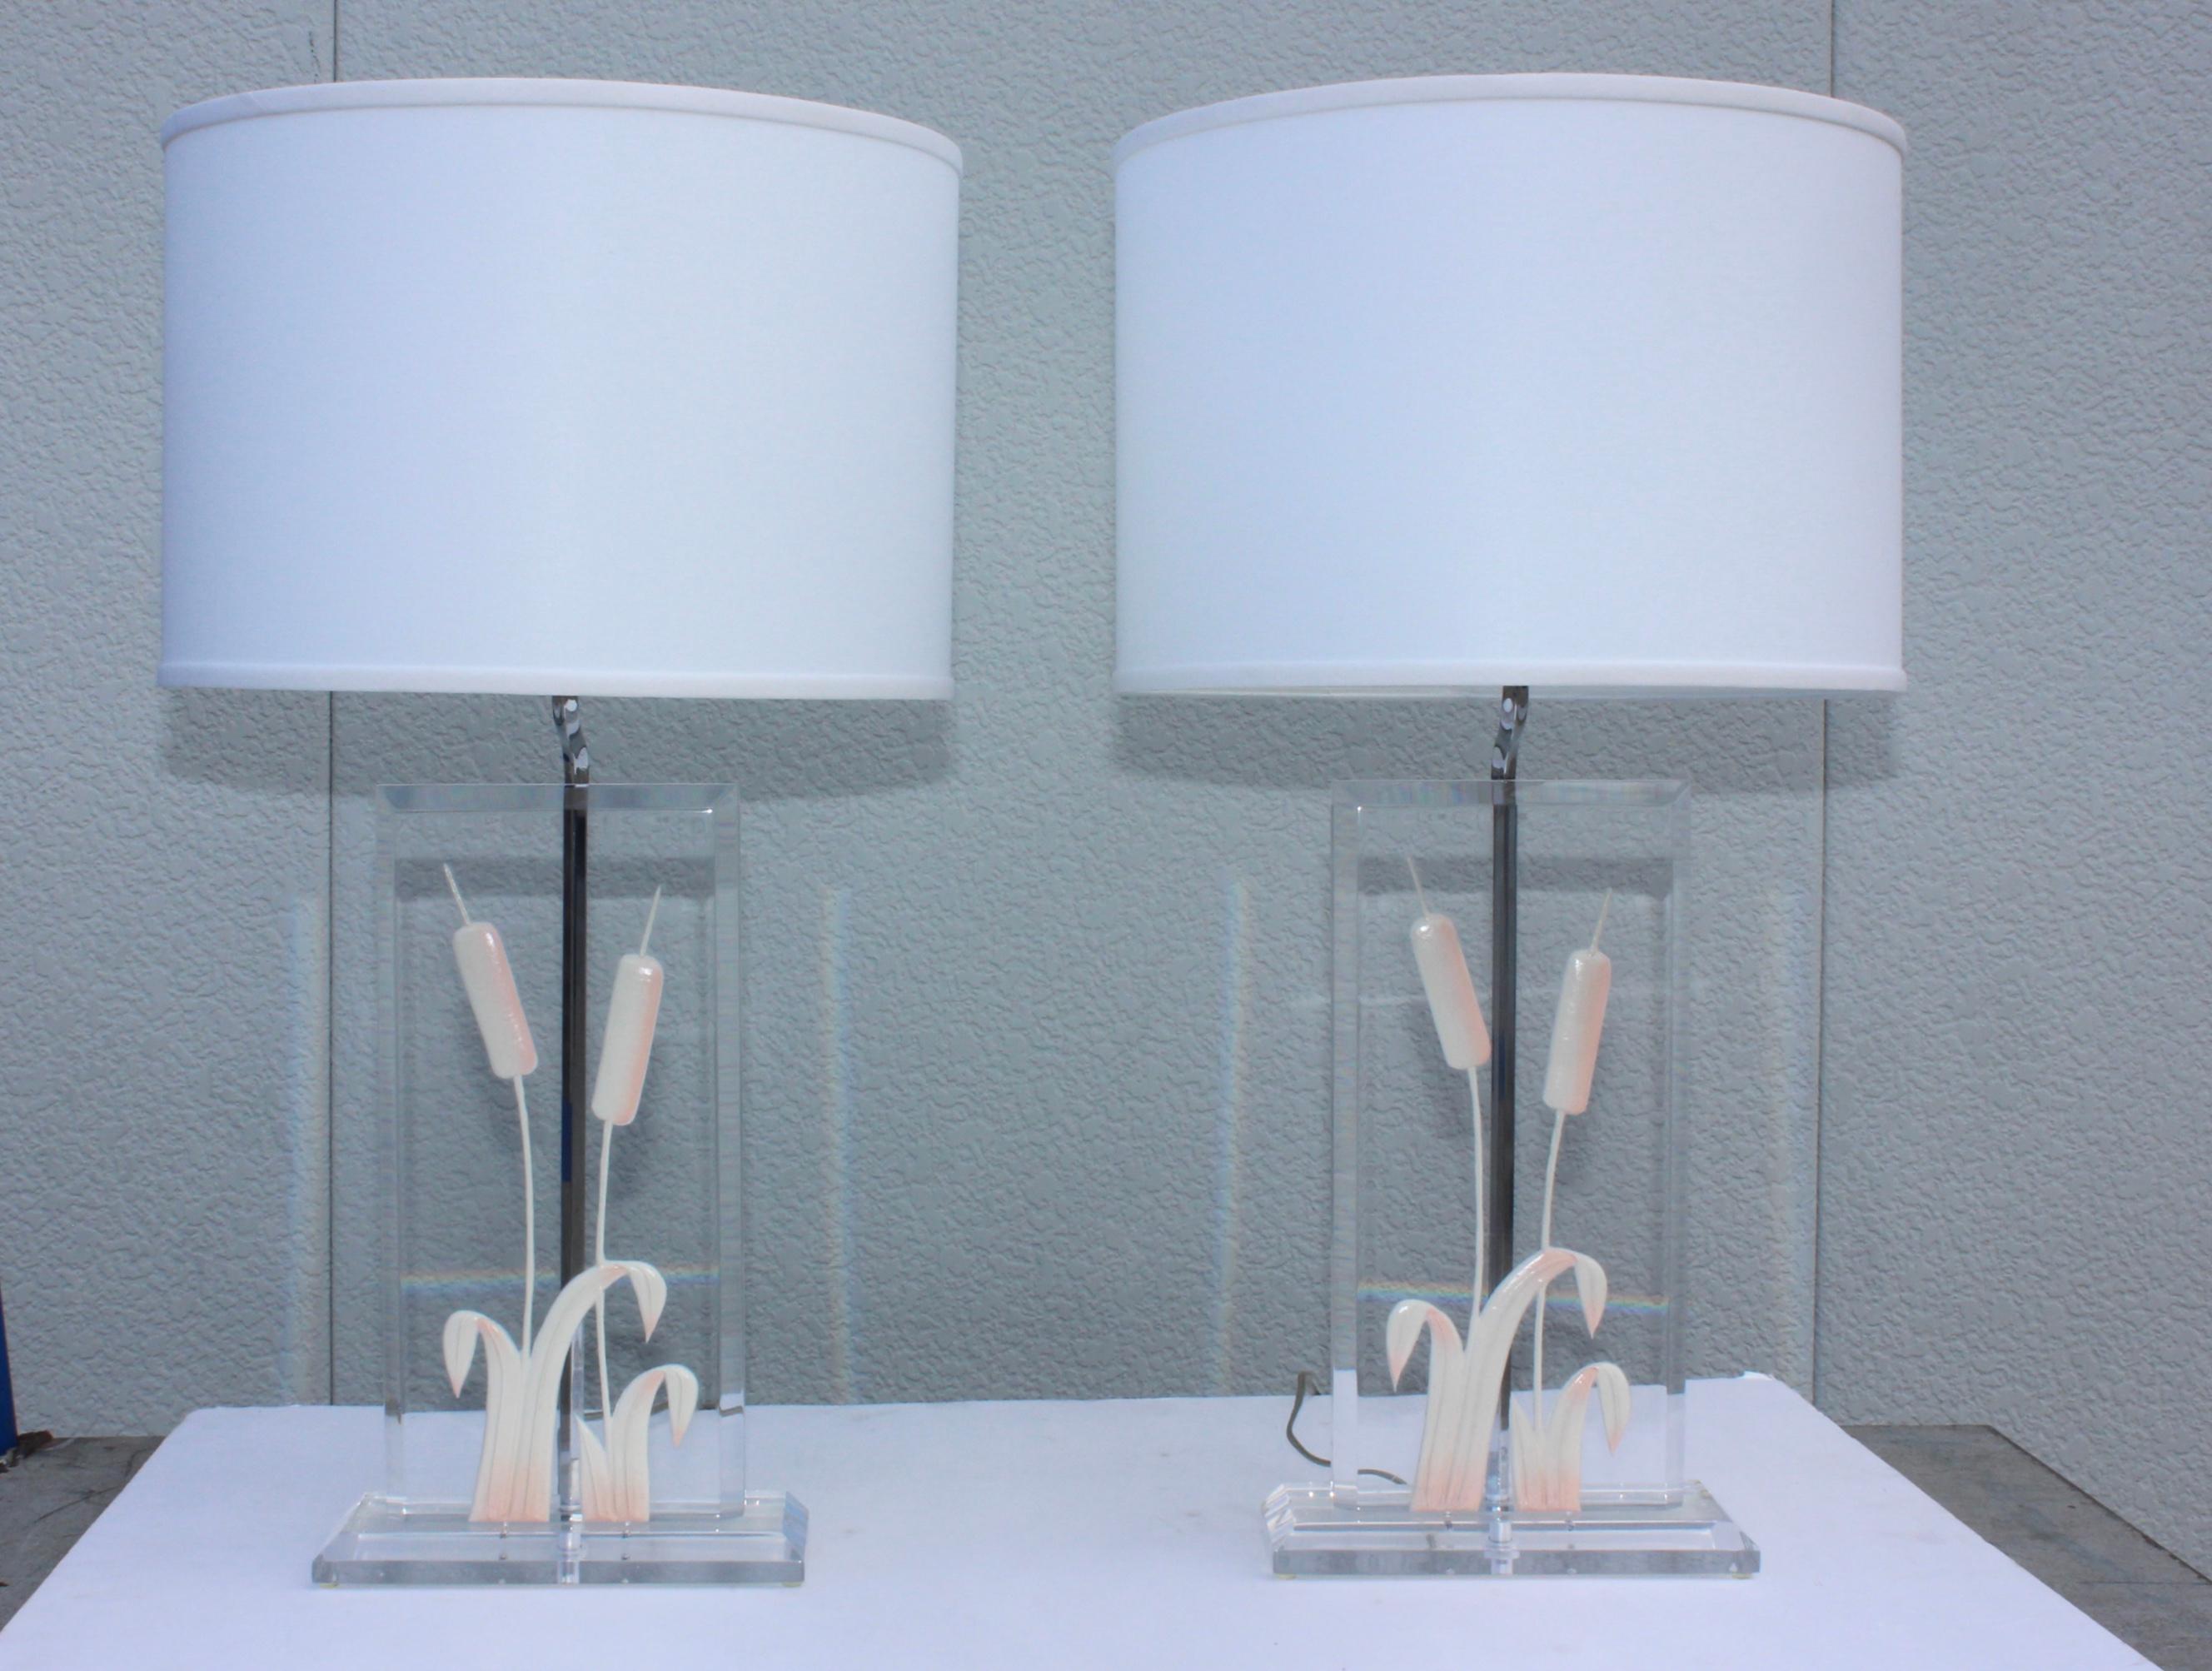 1970s modern Italian Lucite table lamps. With cattail detail and chrome hardware.

Shades for photography only.